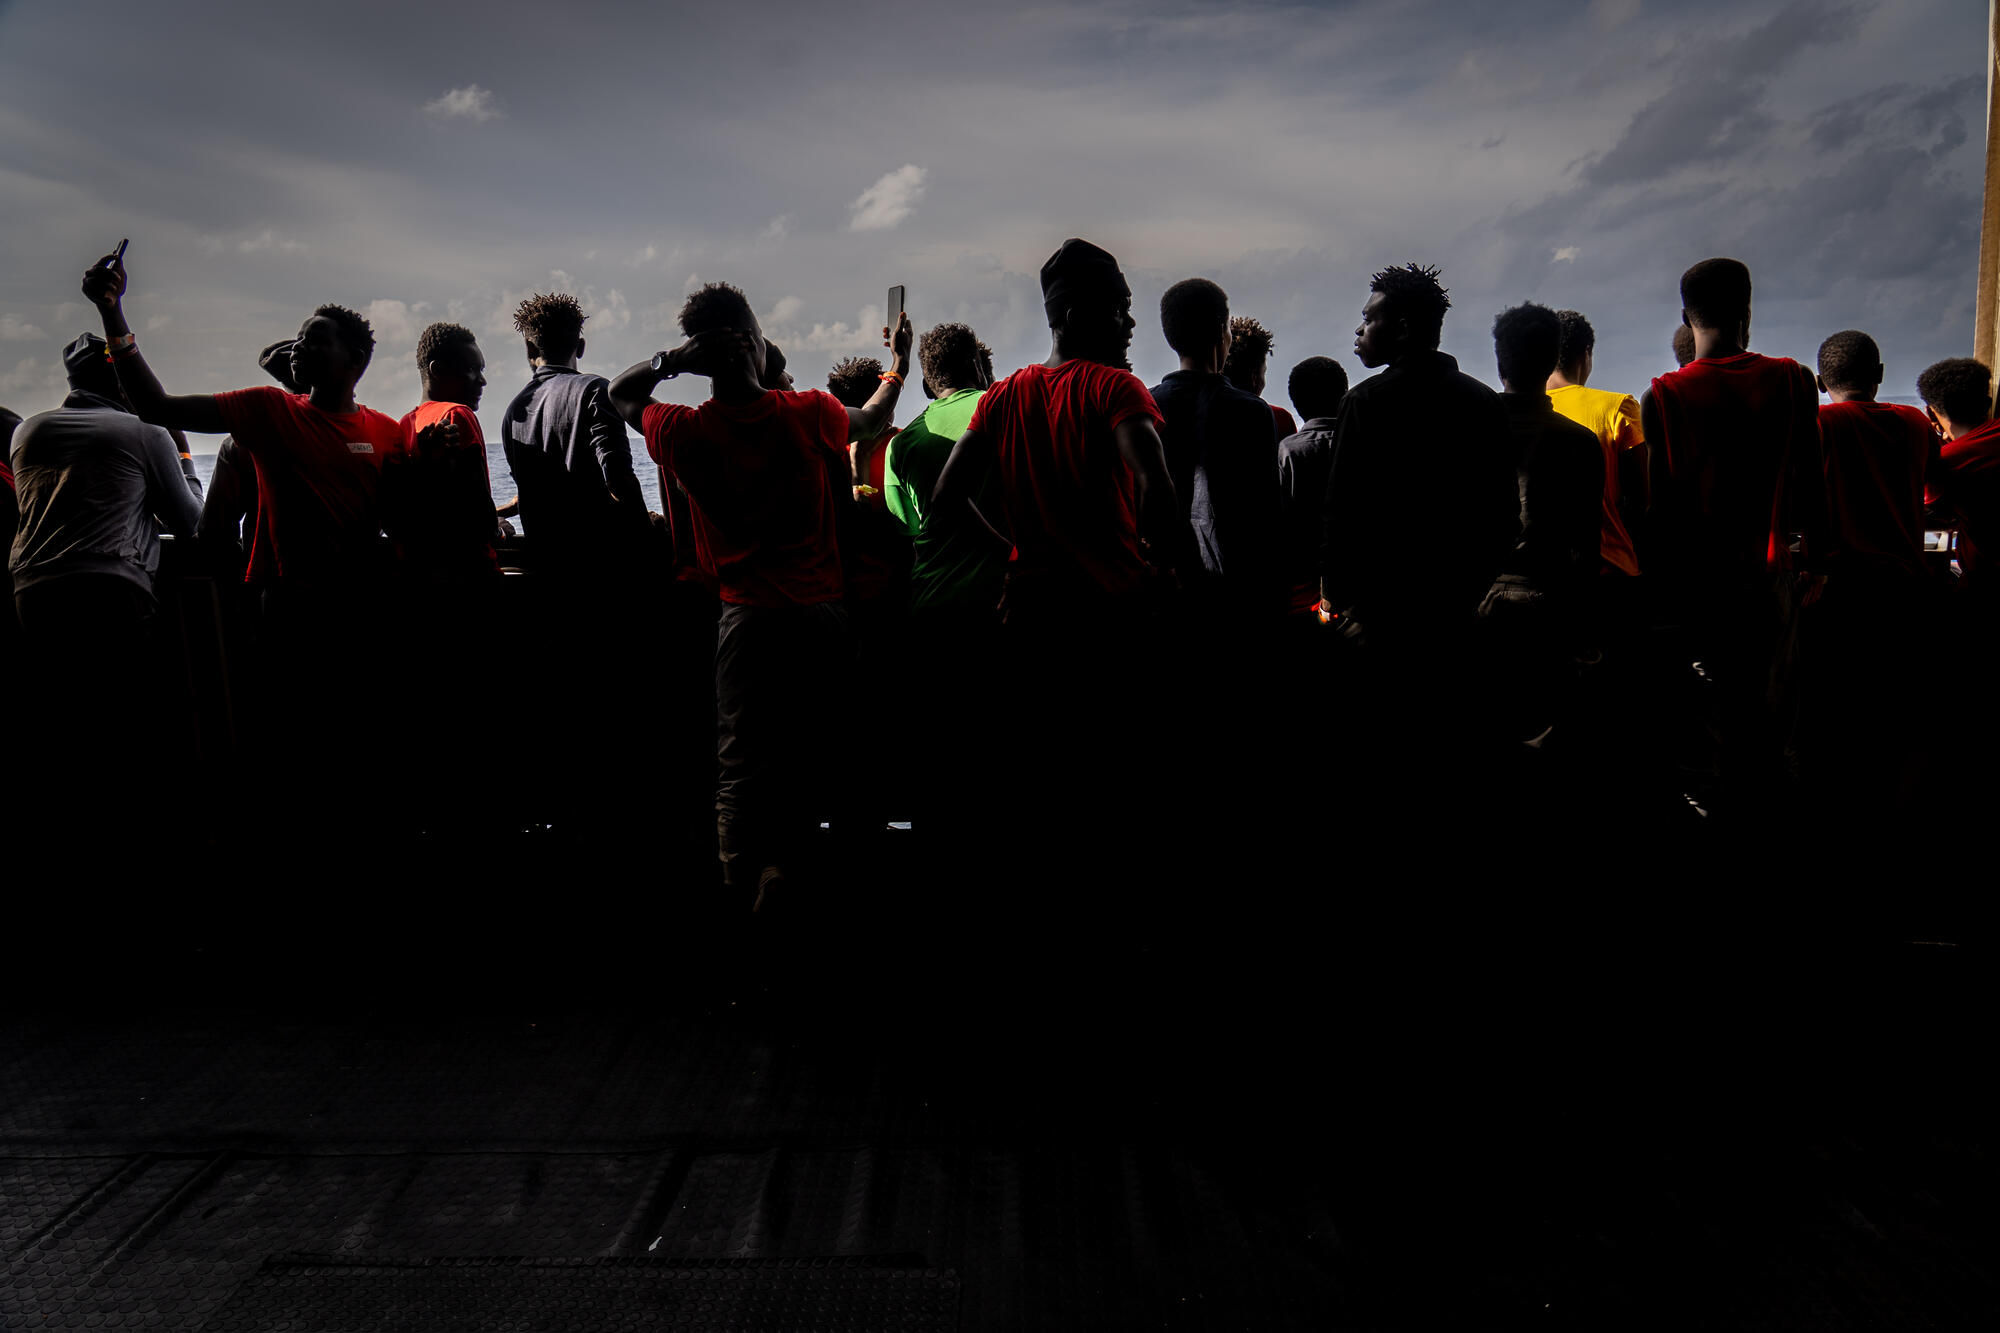 Silhouettes of people rescued by MSF from the Mediterranean Sea